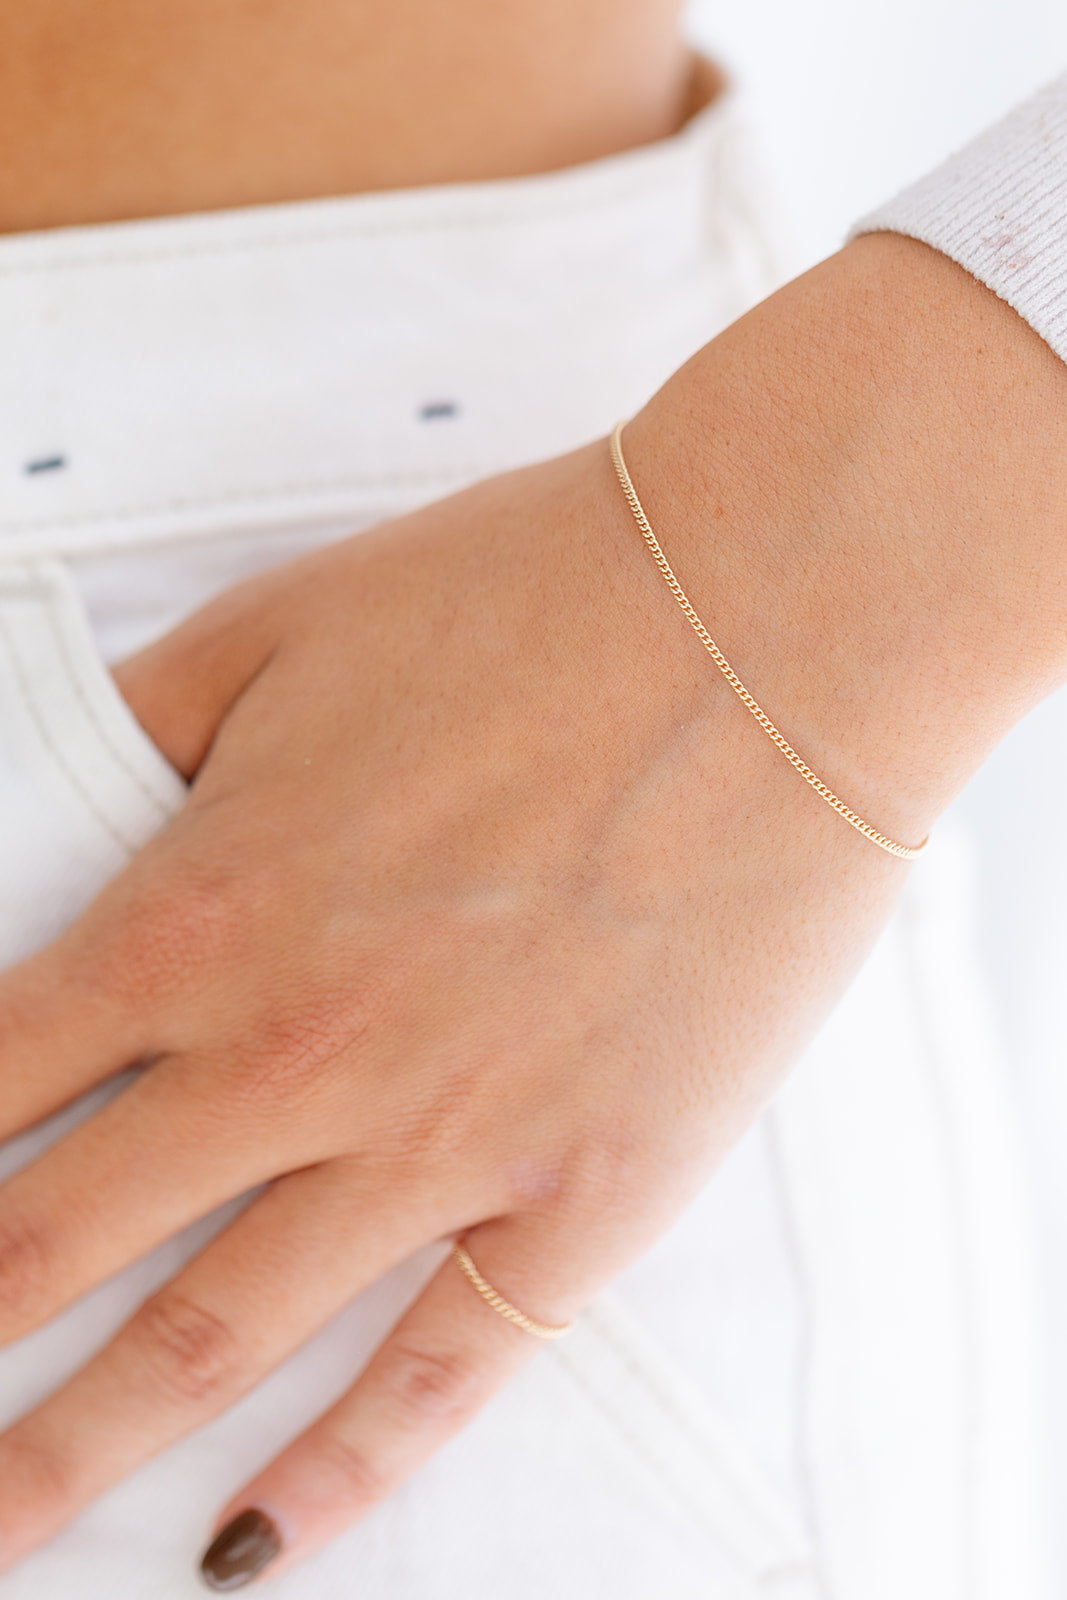 Permanent Gold Chain Bracelet and Ring